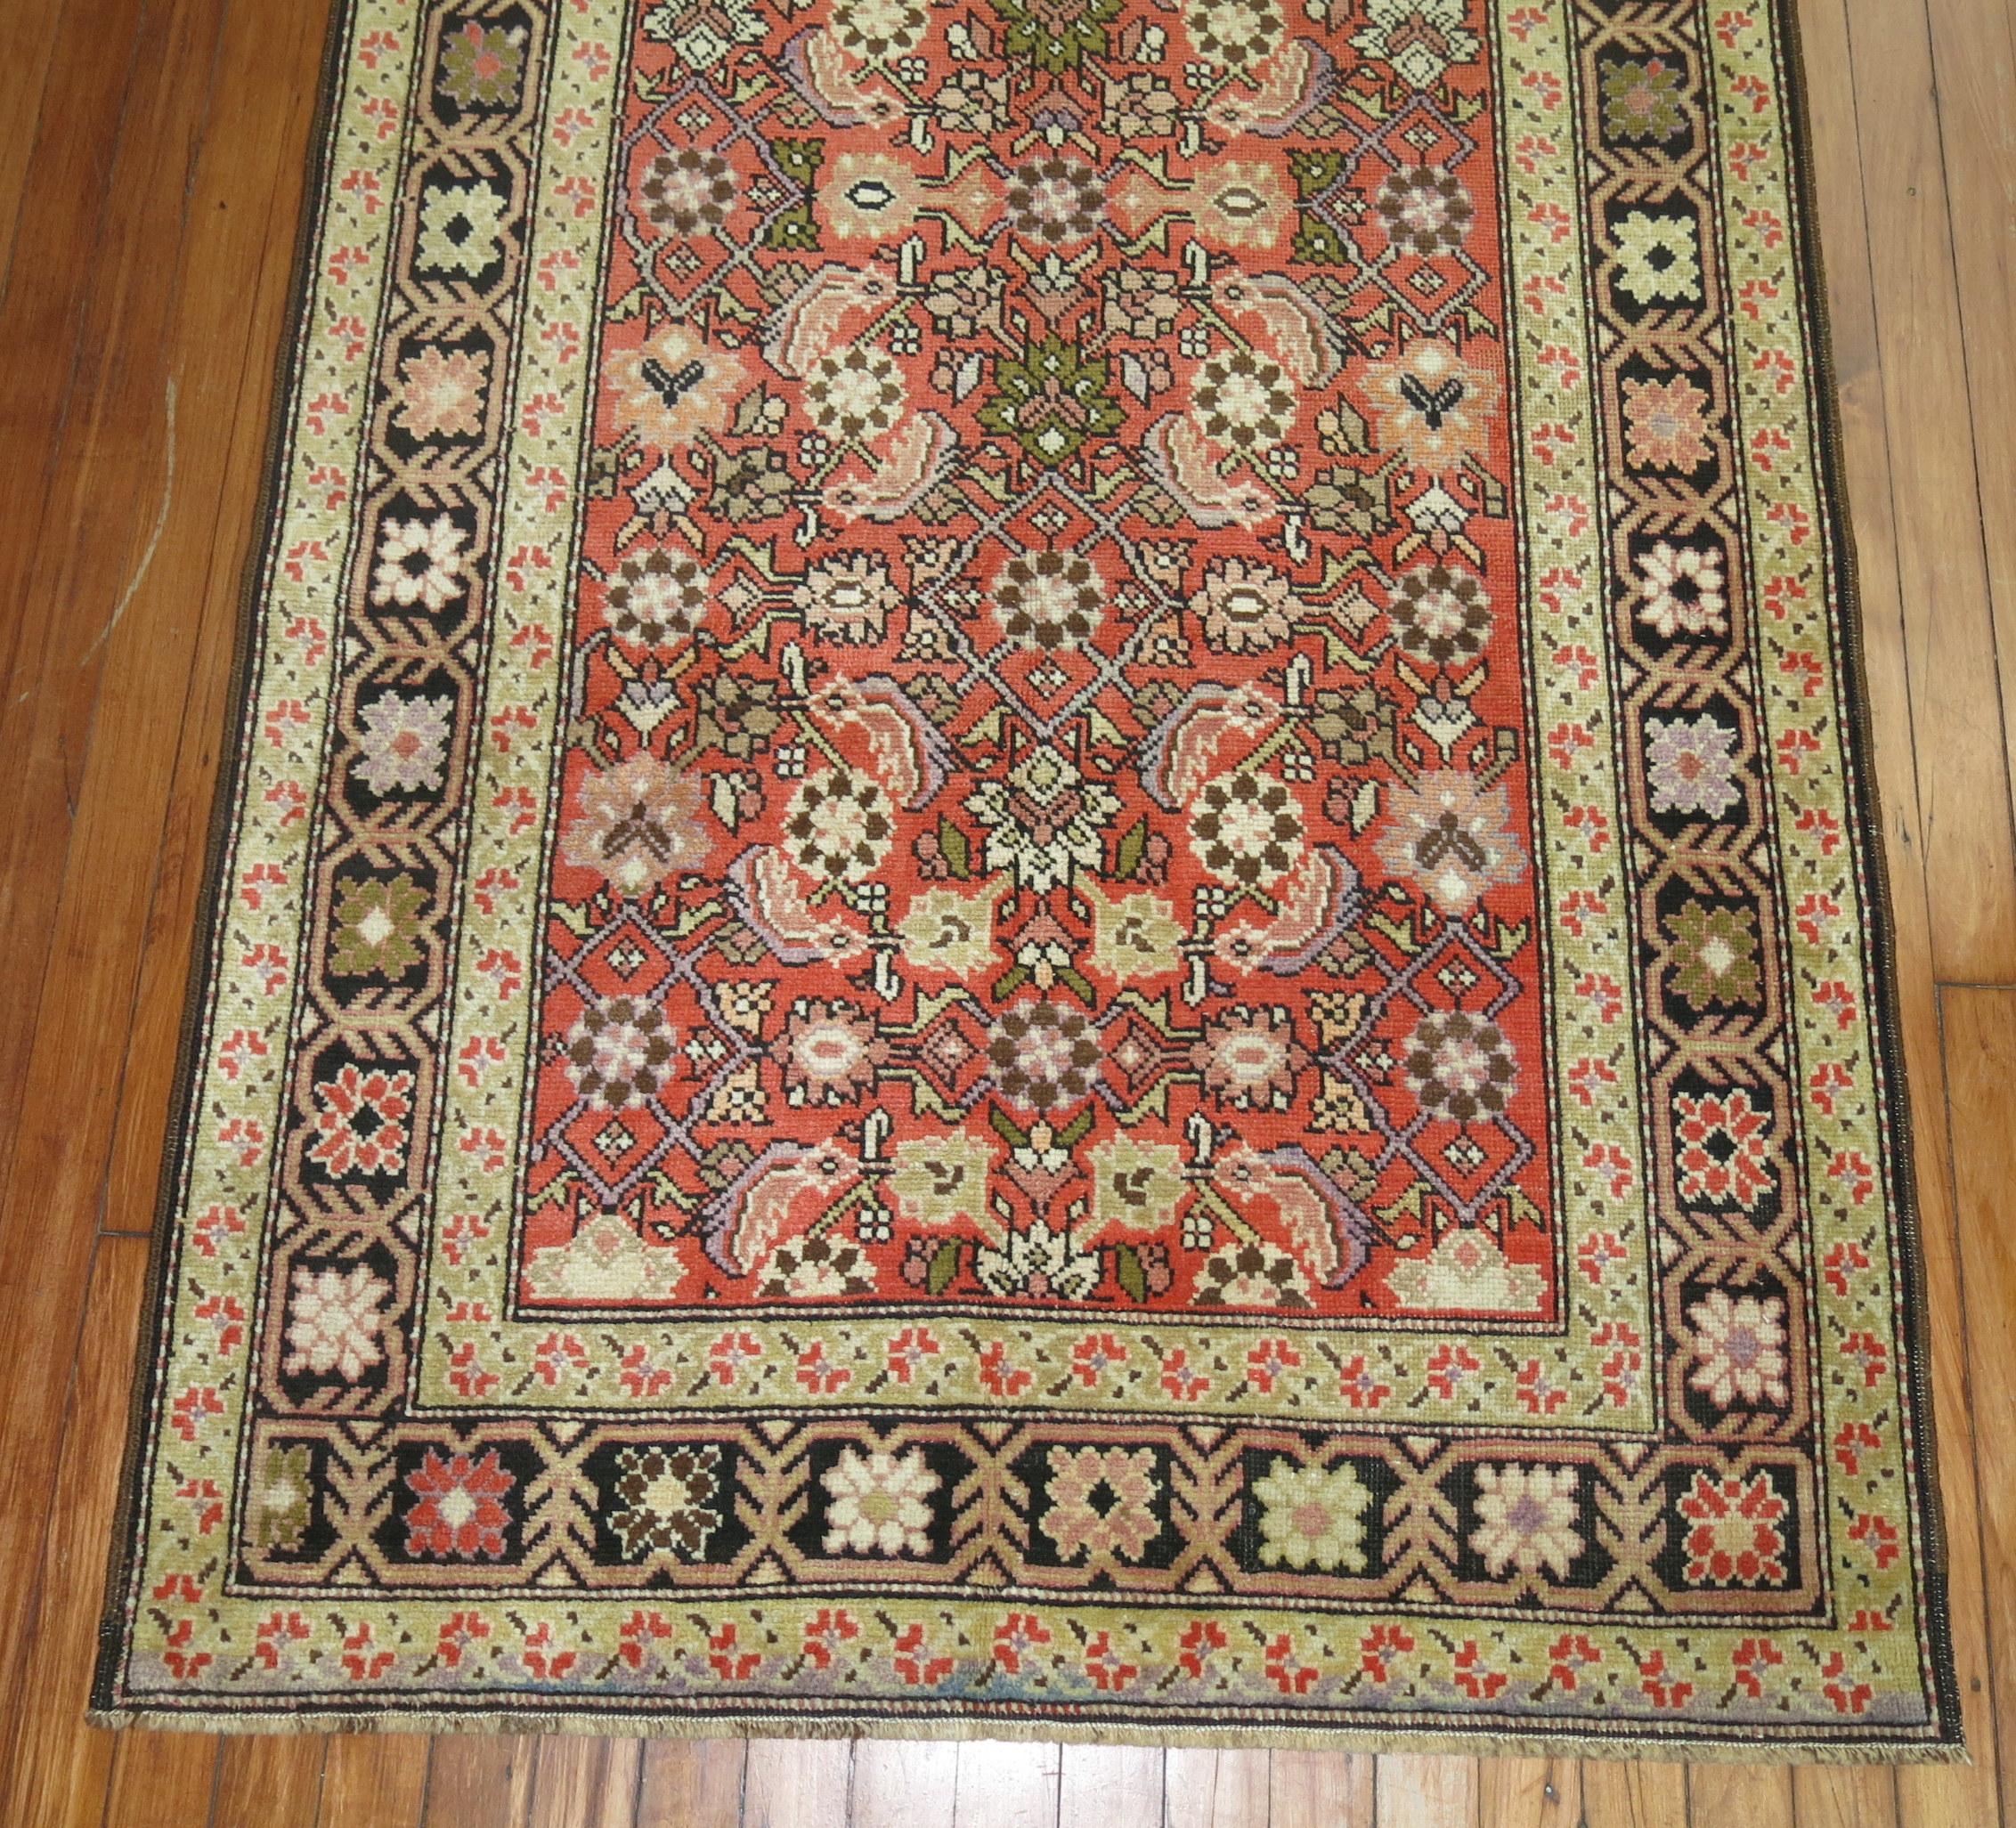 One of a kind Karabagh runner with a soft rose field and dark brown border. The solid repetitive Herati design throughout ~ one of a kind.